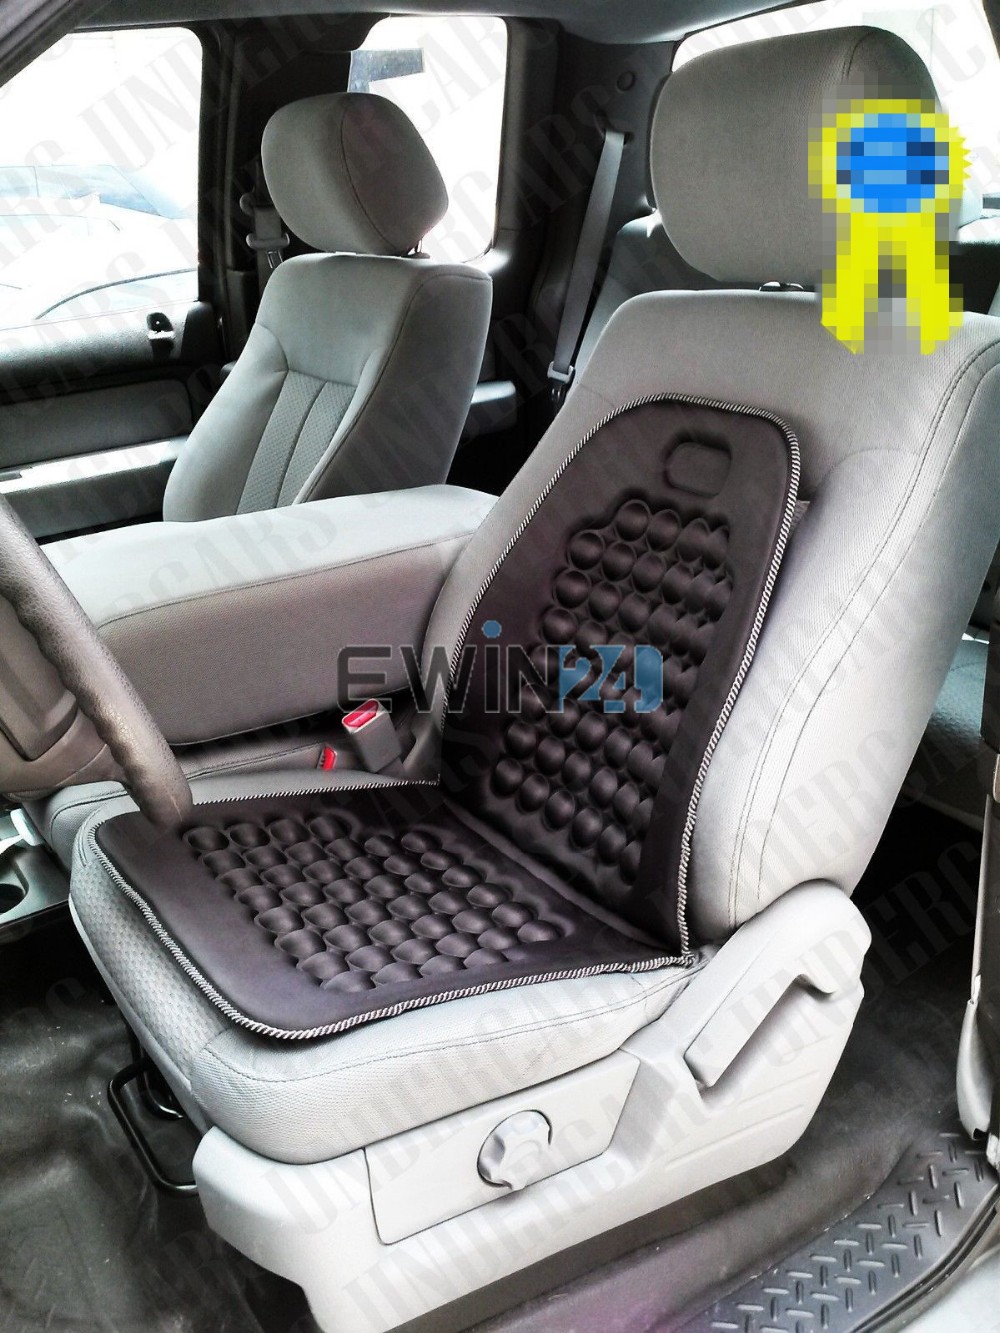 Car Seat Cushion Magnetic Therapy Massage Acu-Beads Auto Office Home (1)